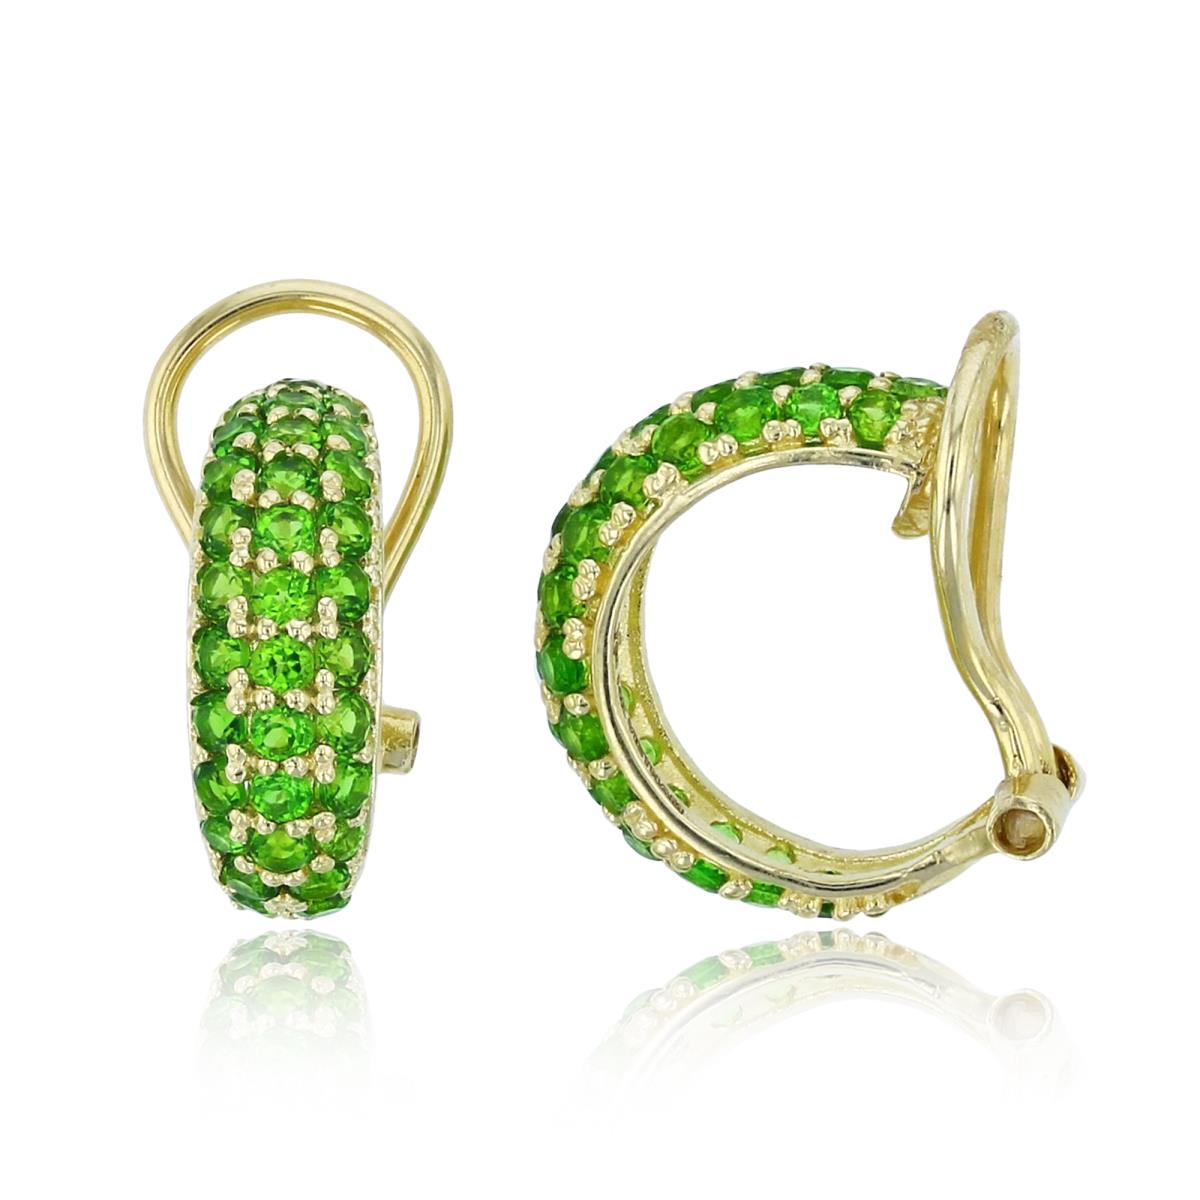 10K Yellow Gold Rnd Chrome Diopside 12x4.5mm Puffy Huggie Non Pierced Earrings